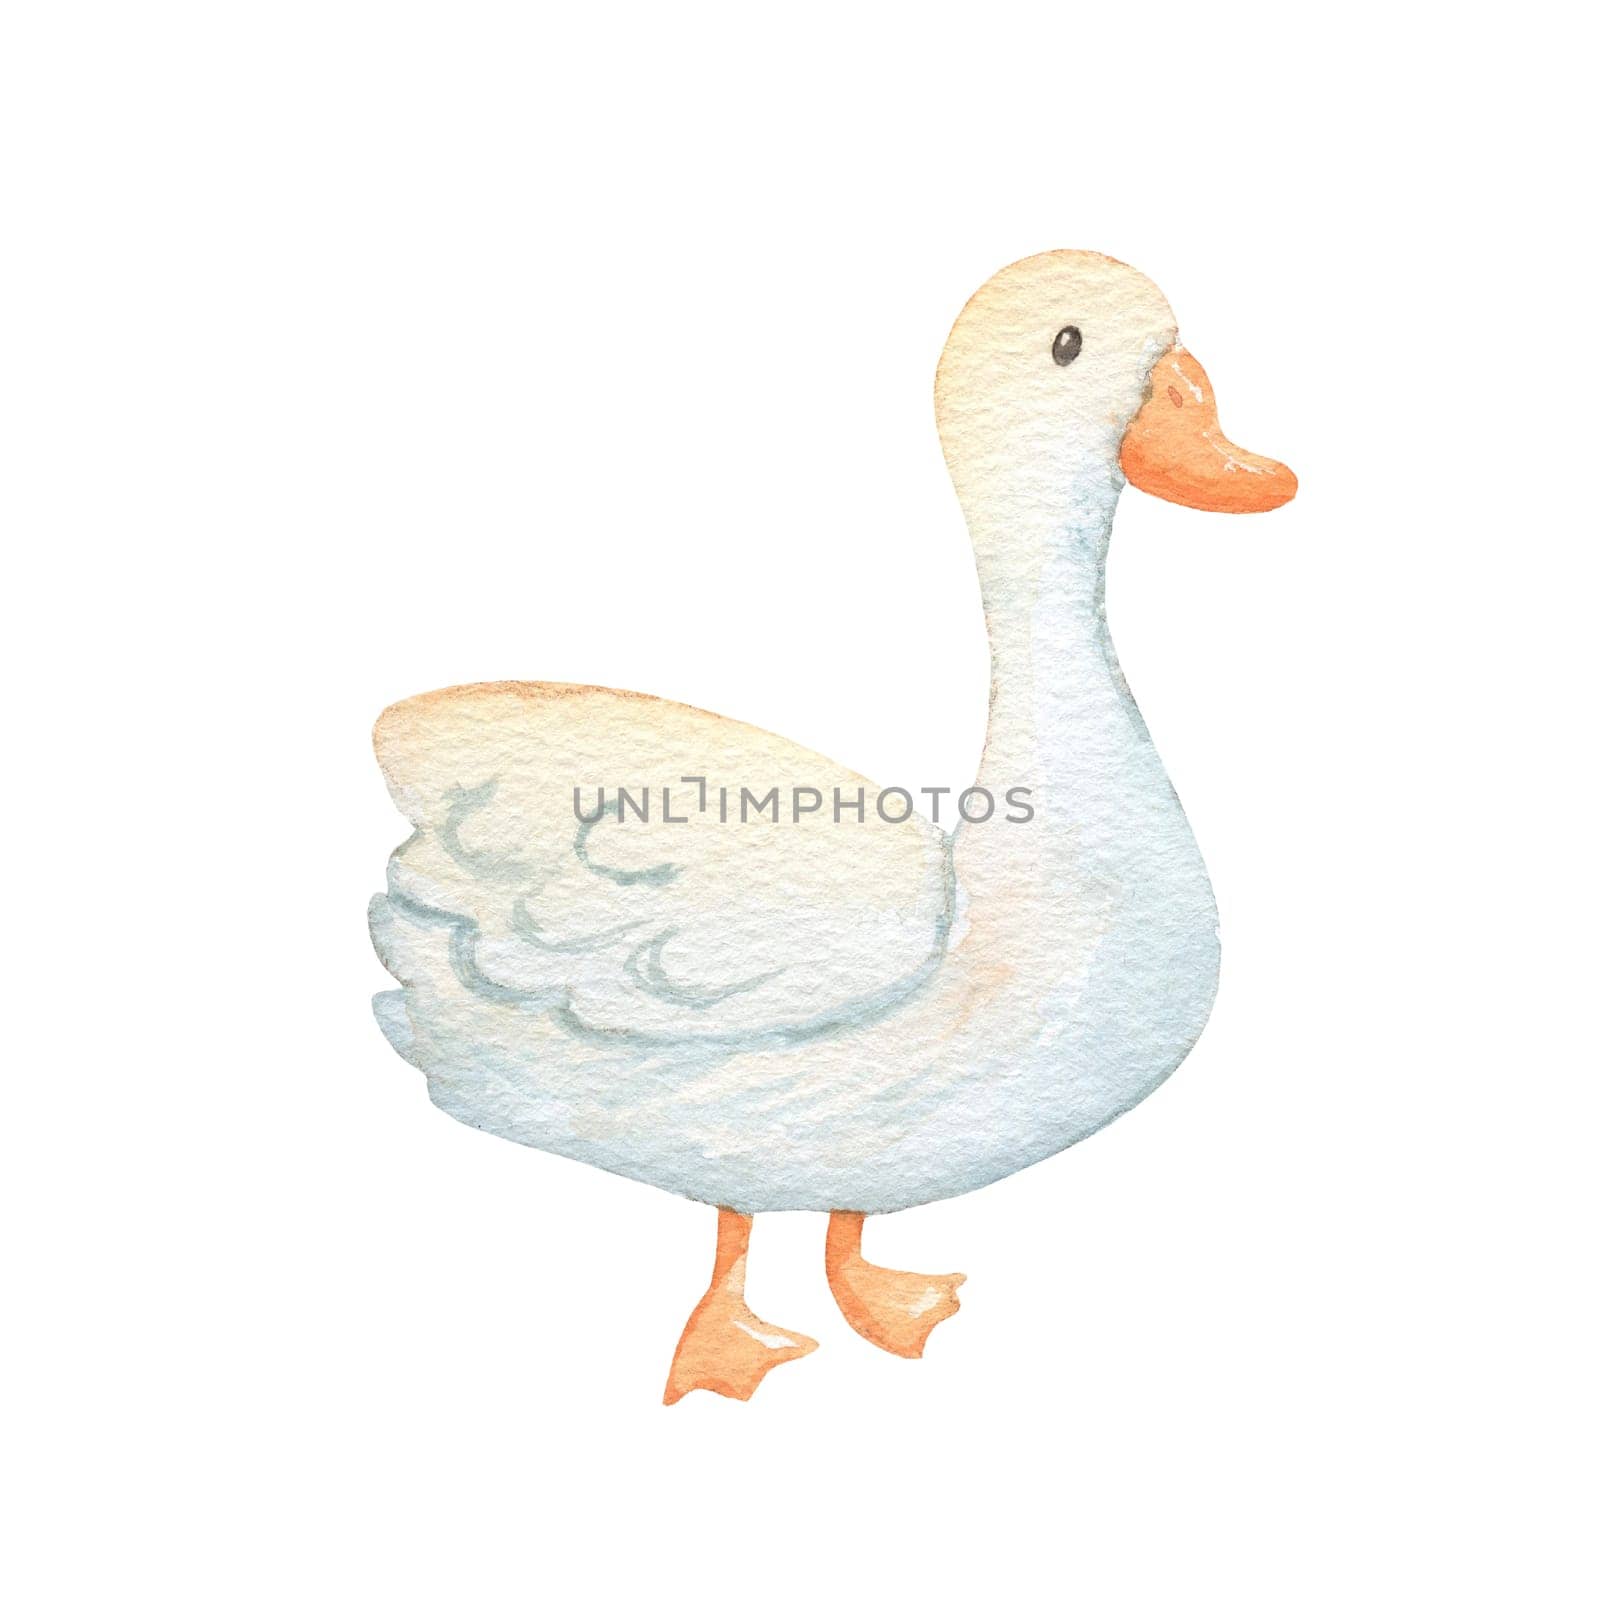 Cute cartoon baby goose. Watercolor illustration isolated on white background. Farm animal